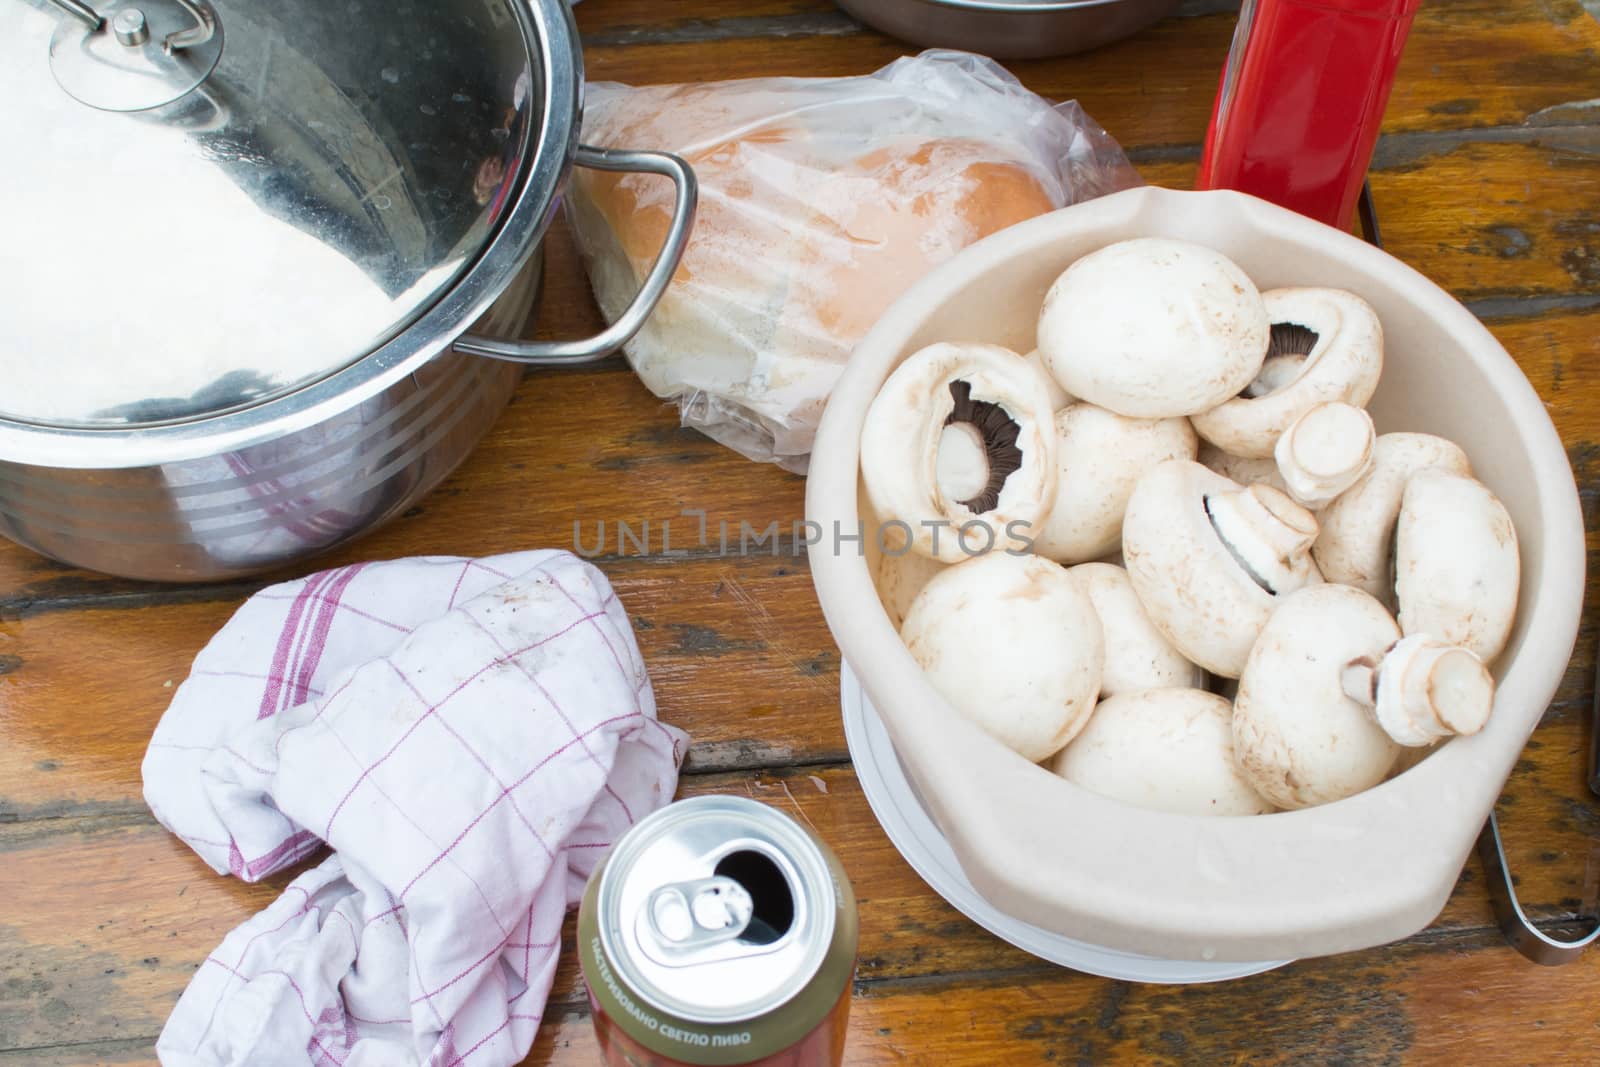 Table with bowl full of mushrooms ready to be grilled. Disorder on the table